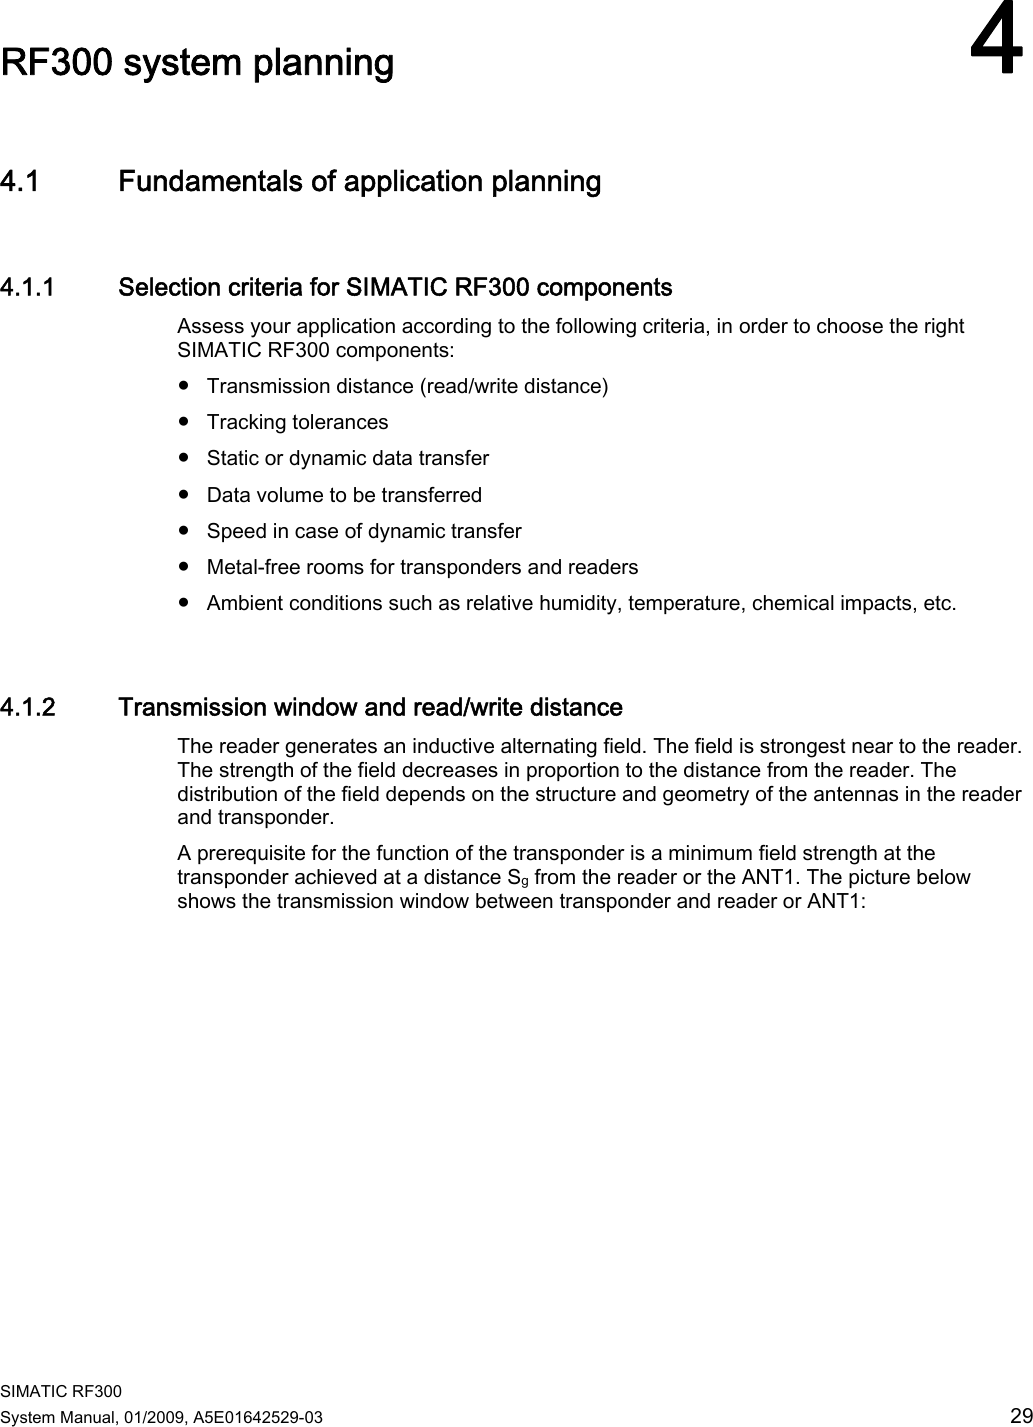  SIMATIC RF300 System Manual, 01/2009, A5E01642529-03  29 RF300 system planning 44.1 Fundamentals of application planning 4.1.1 Selection criteria for SIMATIC RF300 components Assess your application according to the following criteria, in order to choose the right SIMATIC RF300 components:  ● Transmission distance (read/write distance) ● Tracking tolerances ● Static or dynamic data transfer ● Data volume to be transferred ● Speed in case of dynamic transfer ● Metal-free rooms for transponders and readers ● Ambient conditions such as relative humidity, temperature, chemical impacts, etc. 4.1.2 Transmission window and read/write distance The reader generates an inductive alternating field. The field is strongest near to the reader. The strength of the field decreases in proportion to the distance from the reader. The distribution of the field depends on the structure and geometry of the antennas in the reader and transponder.  A prerequisite for the function of the transponder is a minimum field strength at the transponder achieved at a distance Sg from the reader or the ANT1. The picture below shows the transmission window between transponder and reader or ANT1: 